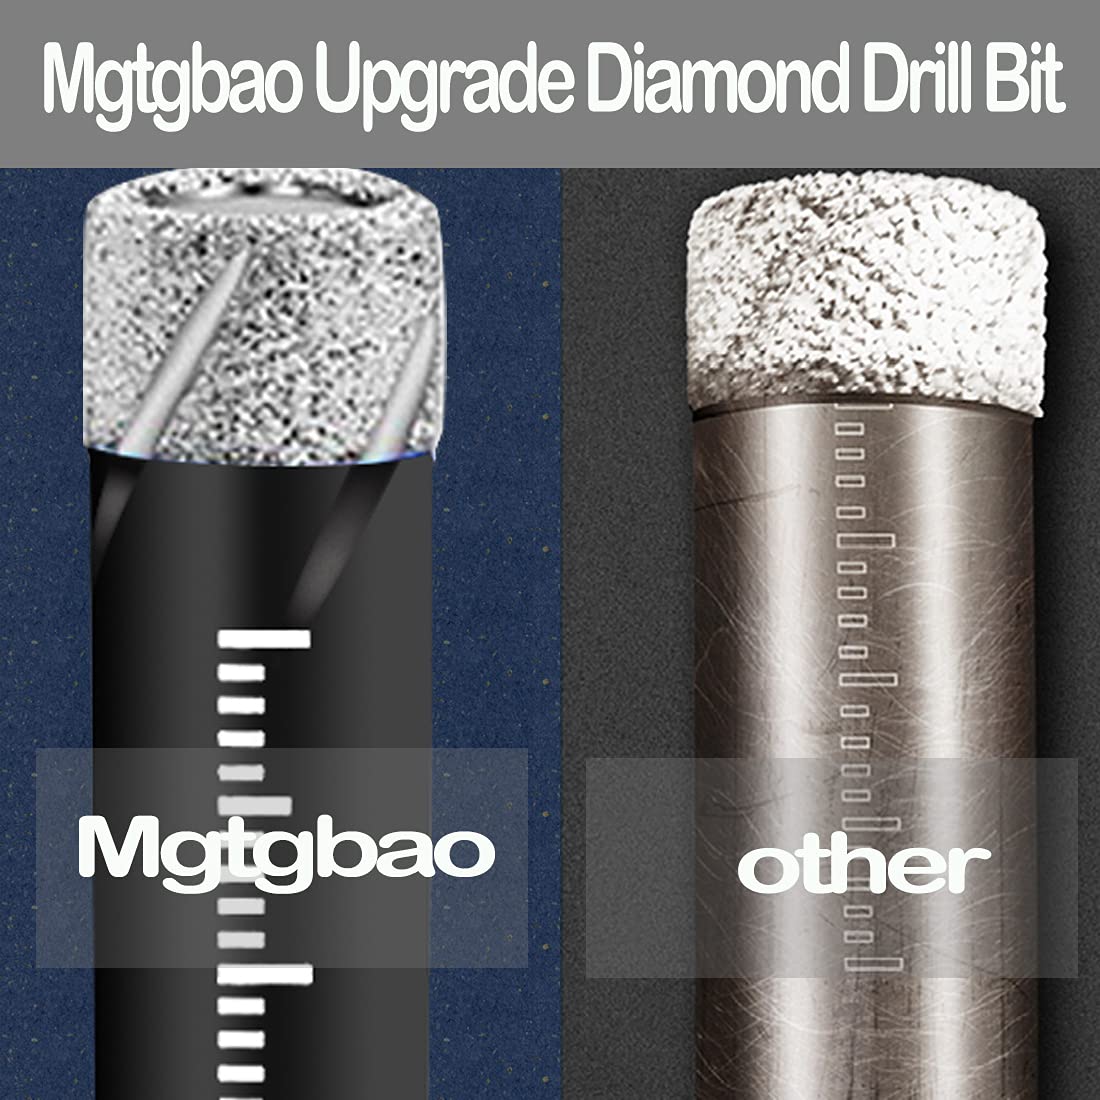 Mgtgao 8pc Black Dry Diamond Drill Bits Set for Granite Ceramic Marble Tile Stone Glass Hard Materials (not for Wood), Round Shank 3/16”, 1/4”, 5/16”, 3/8”, 1/2 ” with Storage Case